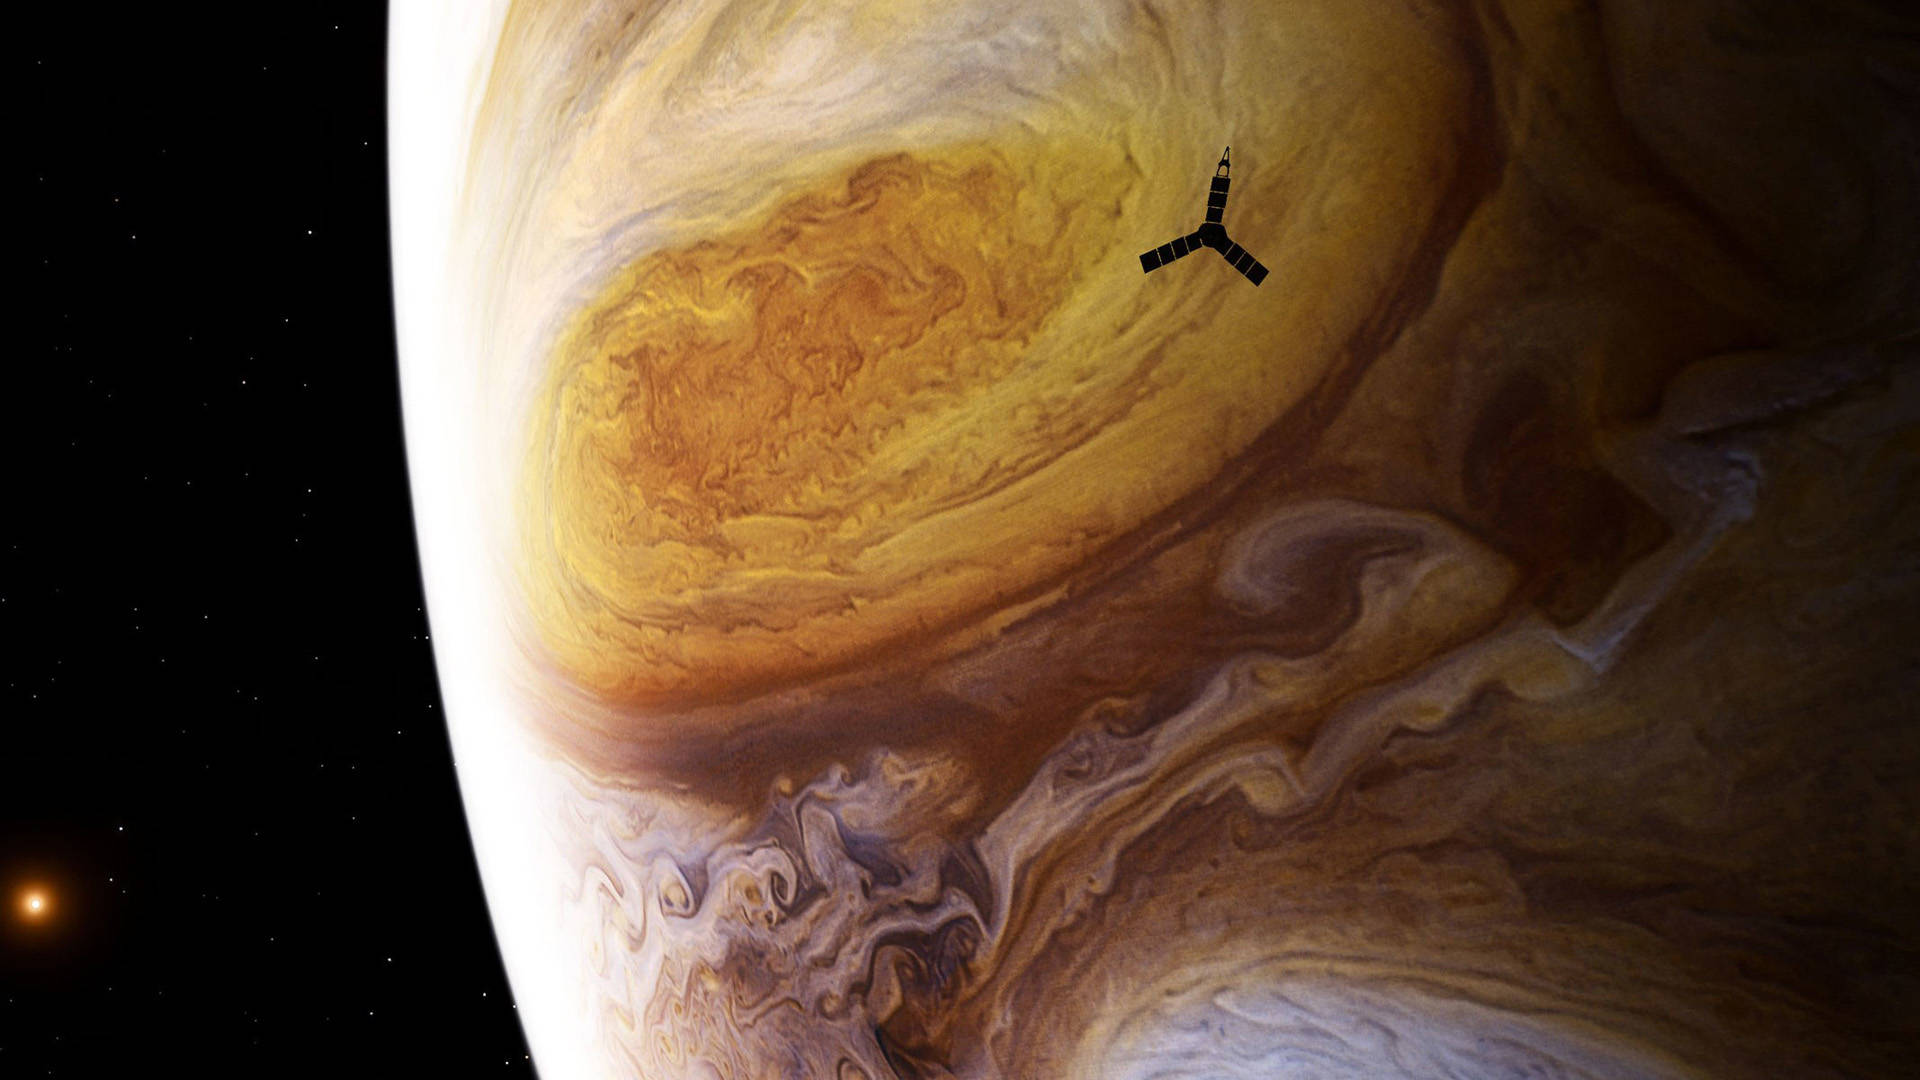 Depiction of NASA's Juno spacecraft during its close encounter with Jupiter's famous Great Red Spot.  NASA/JPL/Björn Jónsson/Seán Doran